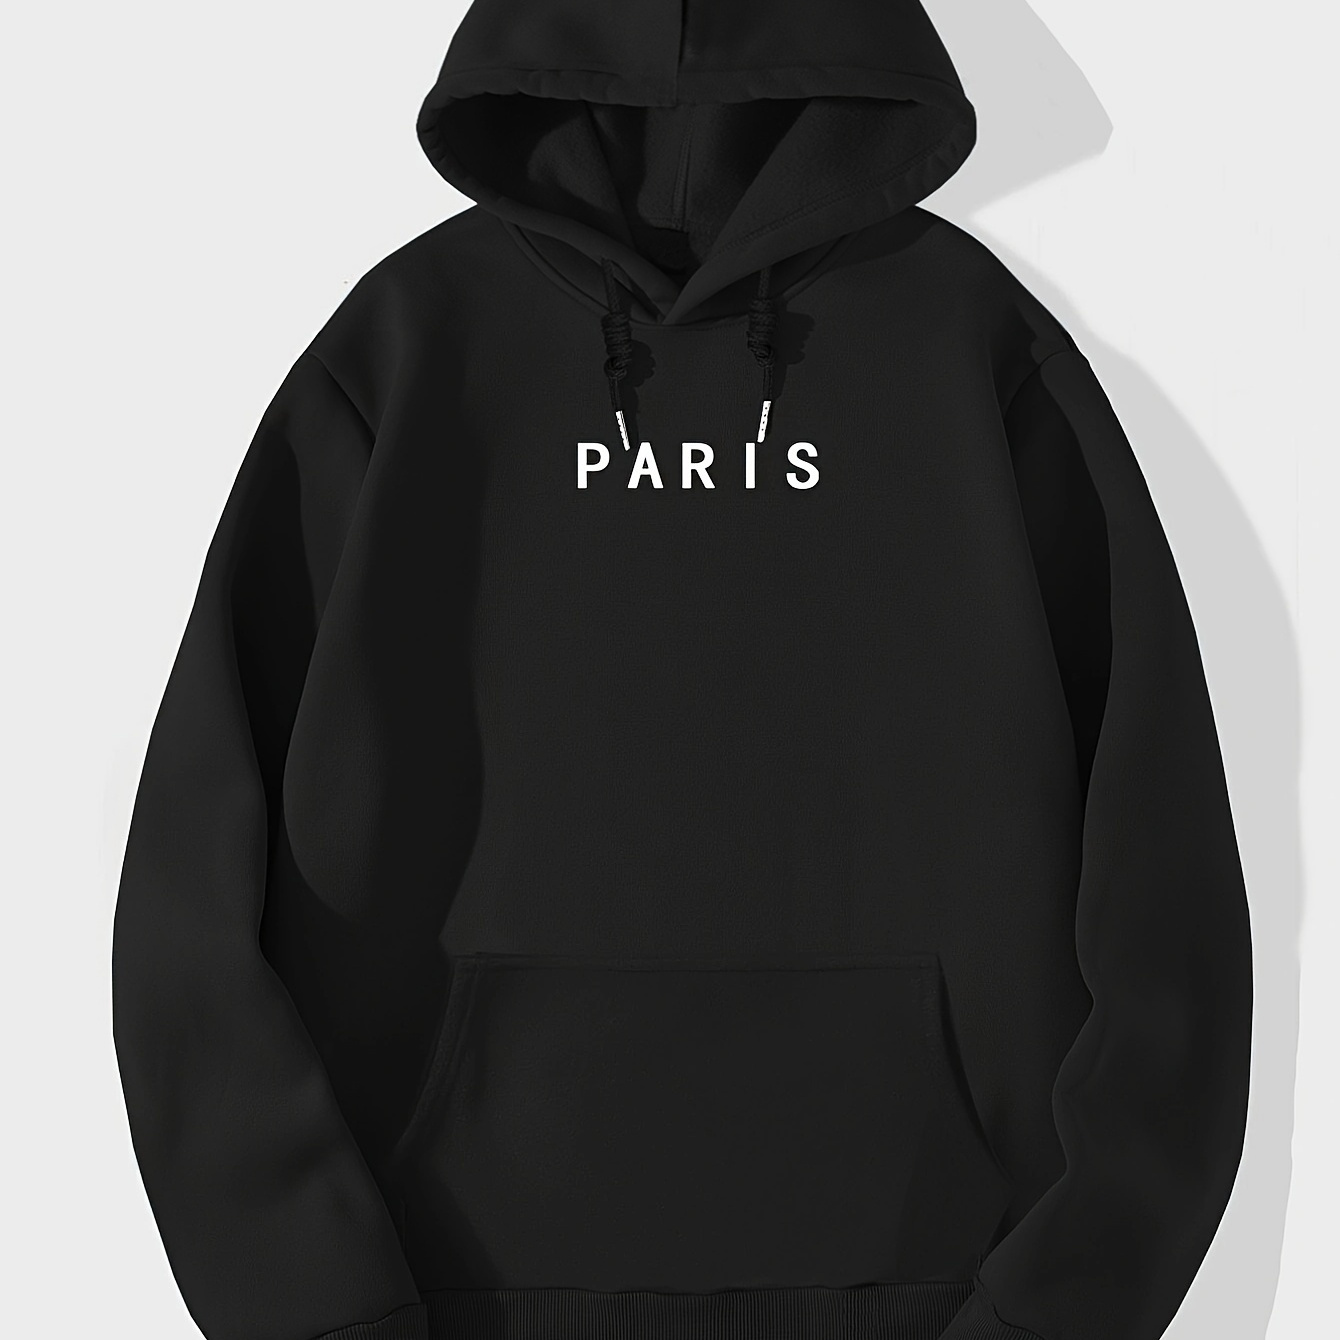 

Paris Drawstring Hoodie With Kangaroo Pocket, Men's Casual Letter Print Long Sleeve Solid Color Slightly Stretch Pullover Hooded Sweatshirt For Spring Fall